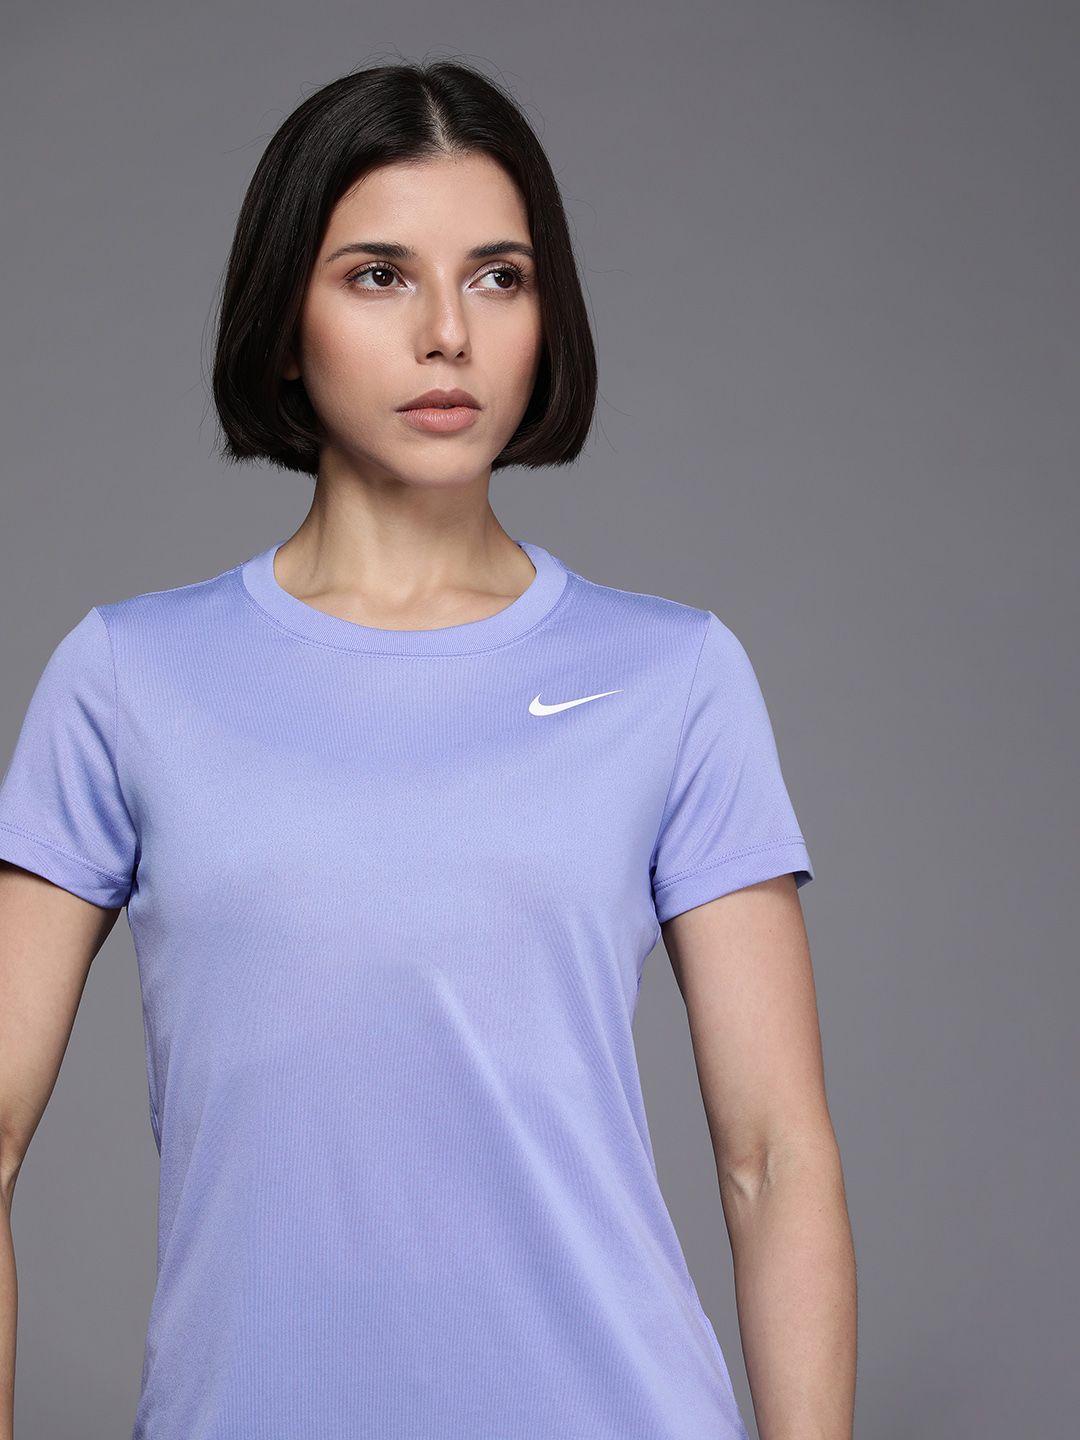 Nike Women Lavender Solid Dri-FIT Training T-shirt Price in India